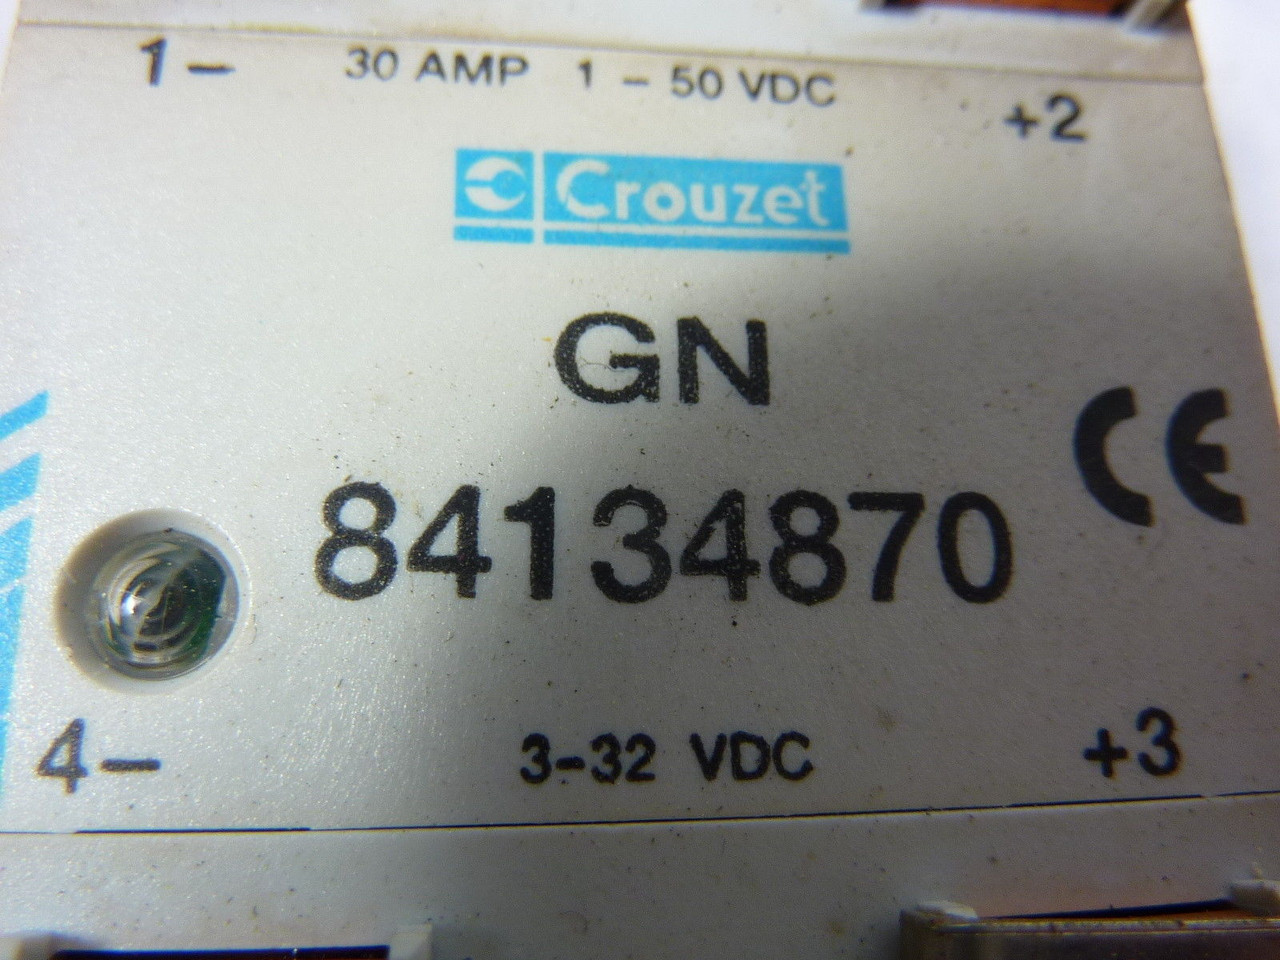 Crouzet GN84134870 Solid State Relay 30A 1-50VDC USED